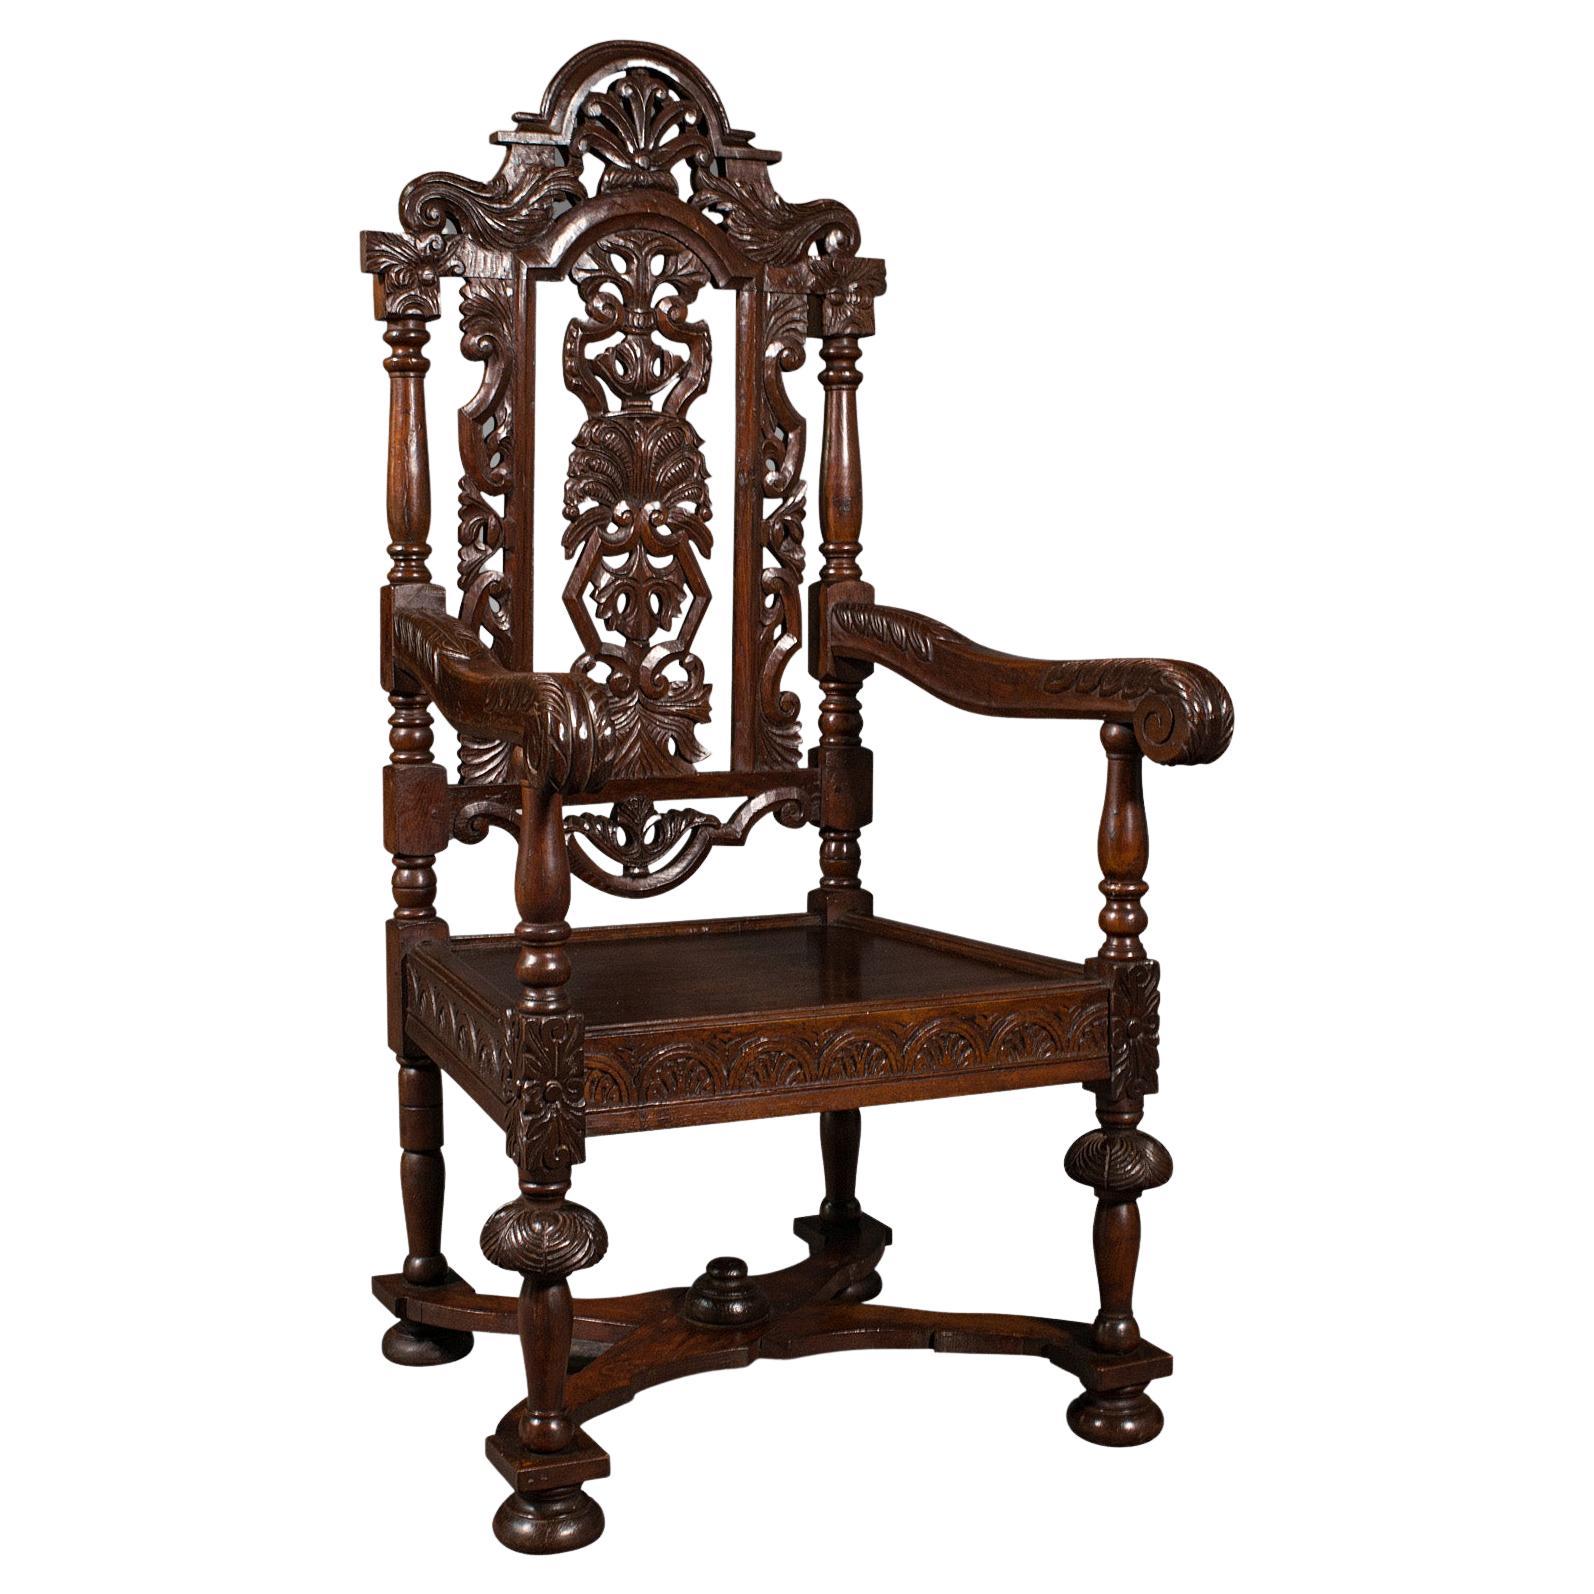 Antique Carved Throne Chair - 82 For Sale on 1stDibs | antique throne chair,  vintage throne chair, antique throne chairs for sale